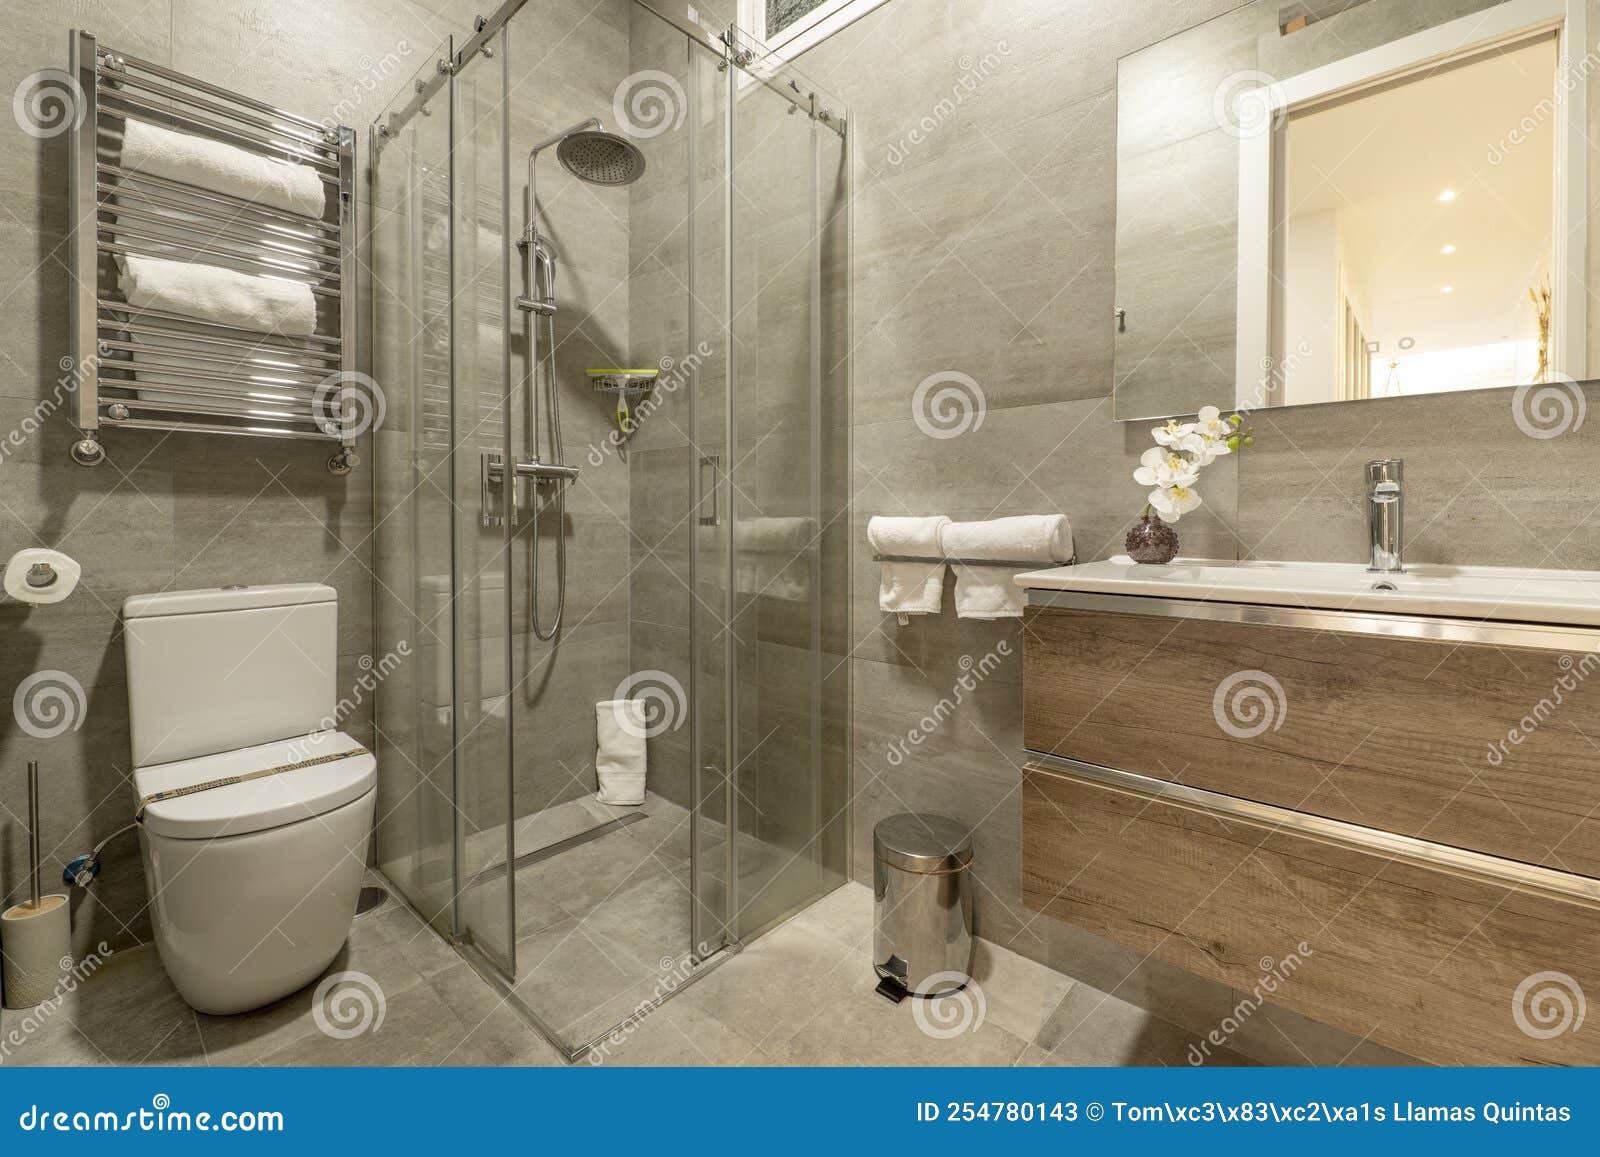 bathroom with oak wood chest of drawers with imitation marble tiles, frameless mirror on the wall and glass shower cabin